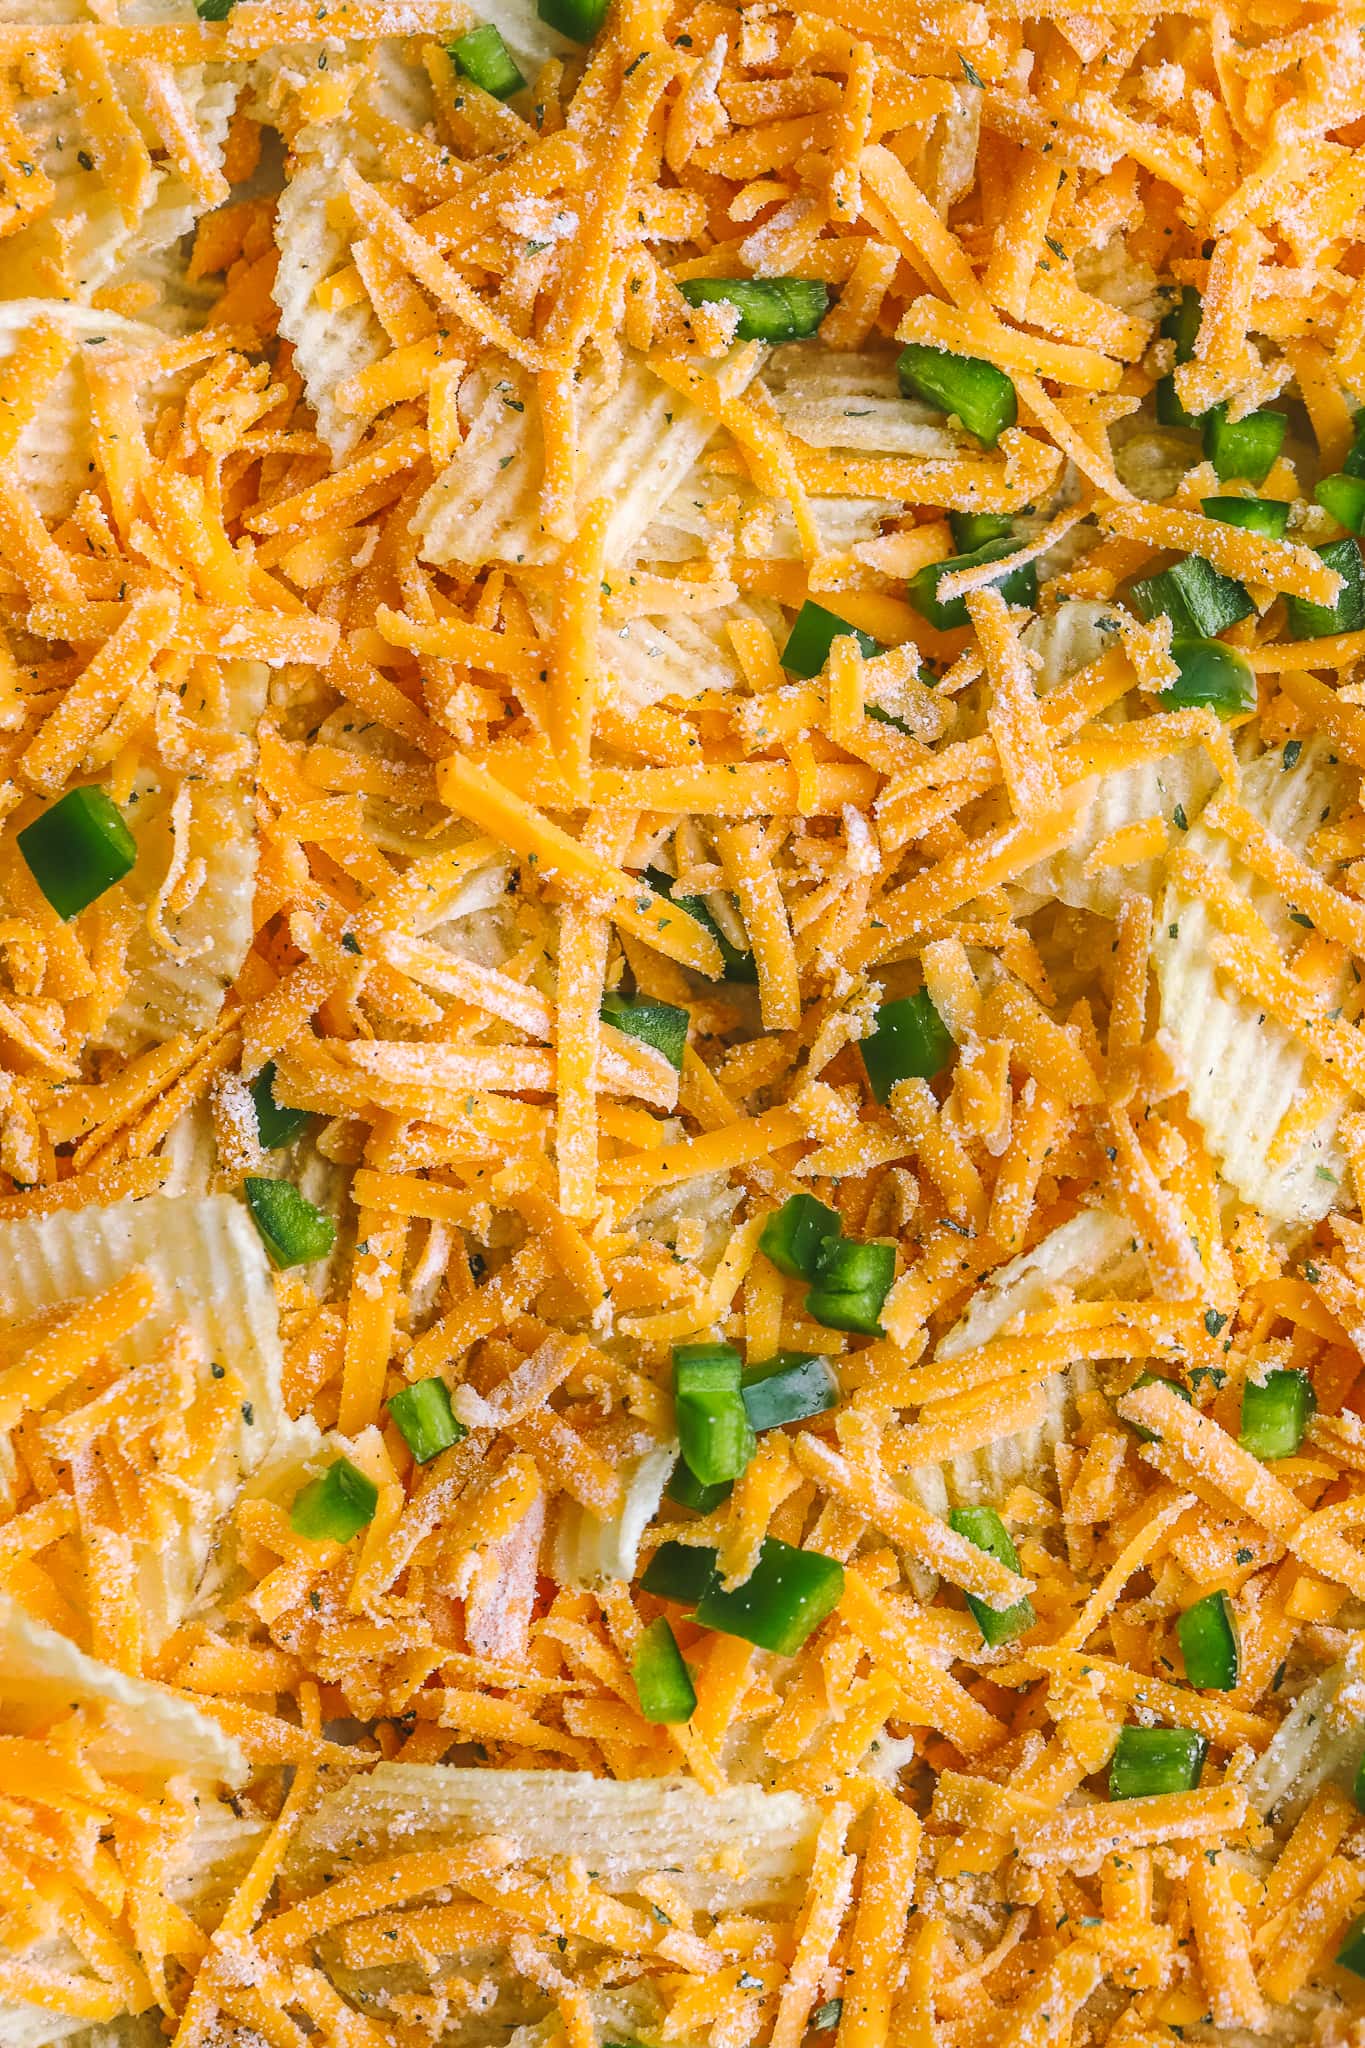 close up of shredded cheese and jalapenos on wavy chips